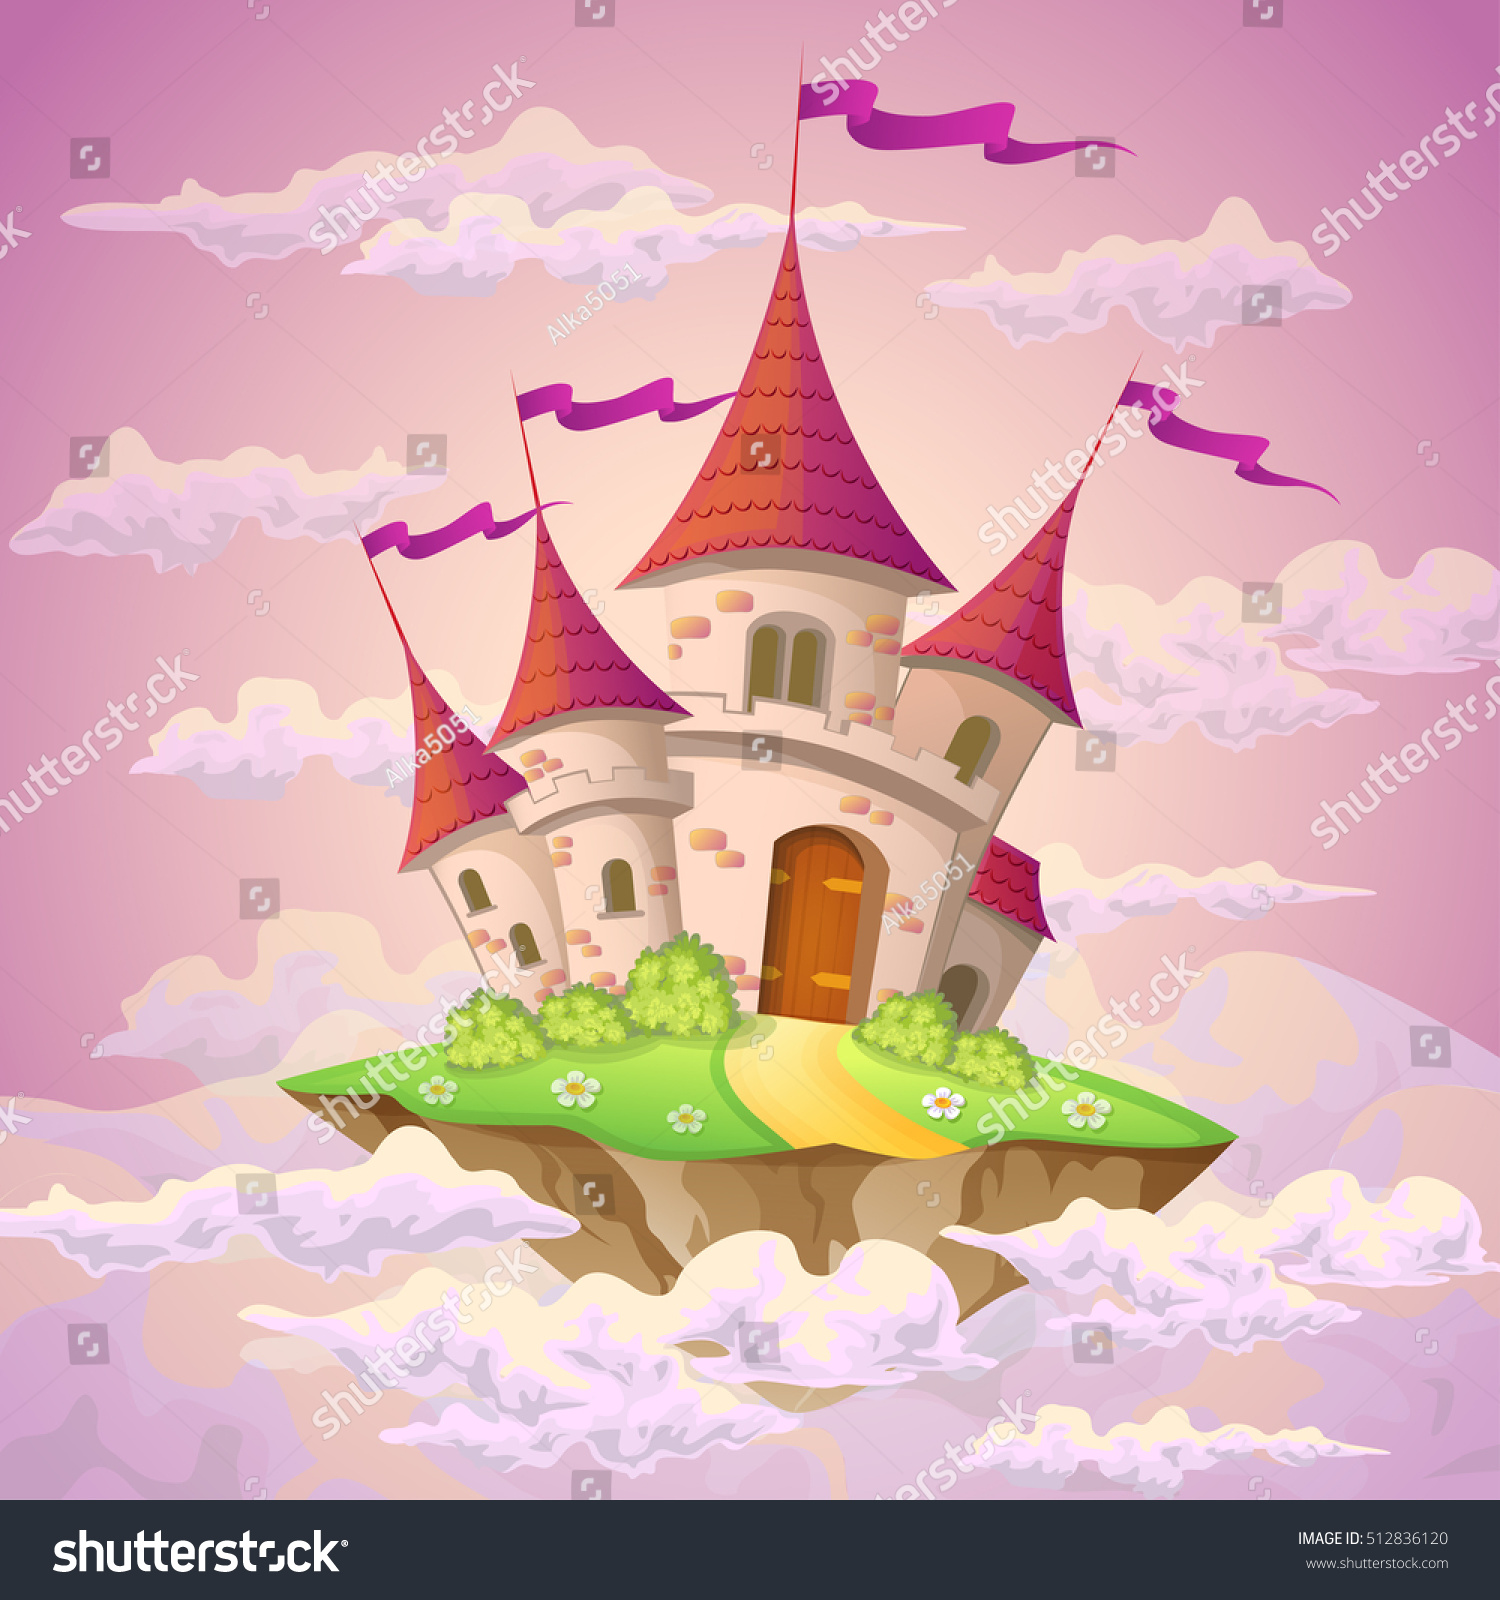 SVG of Fantasy flying island with fairy tale castle in clouds svg